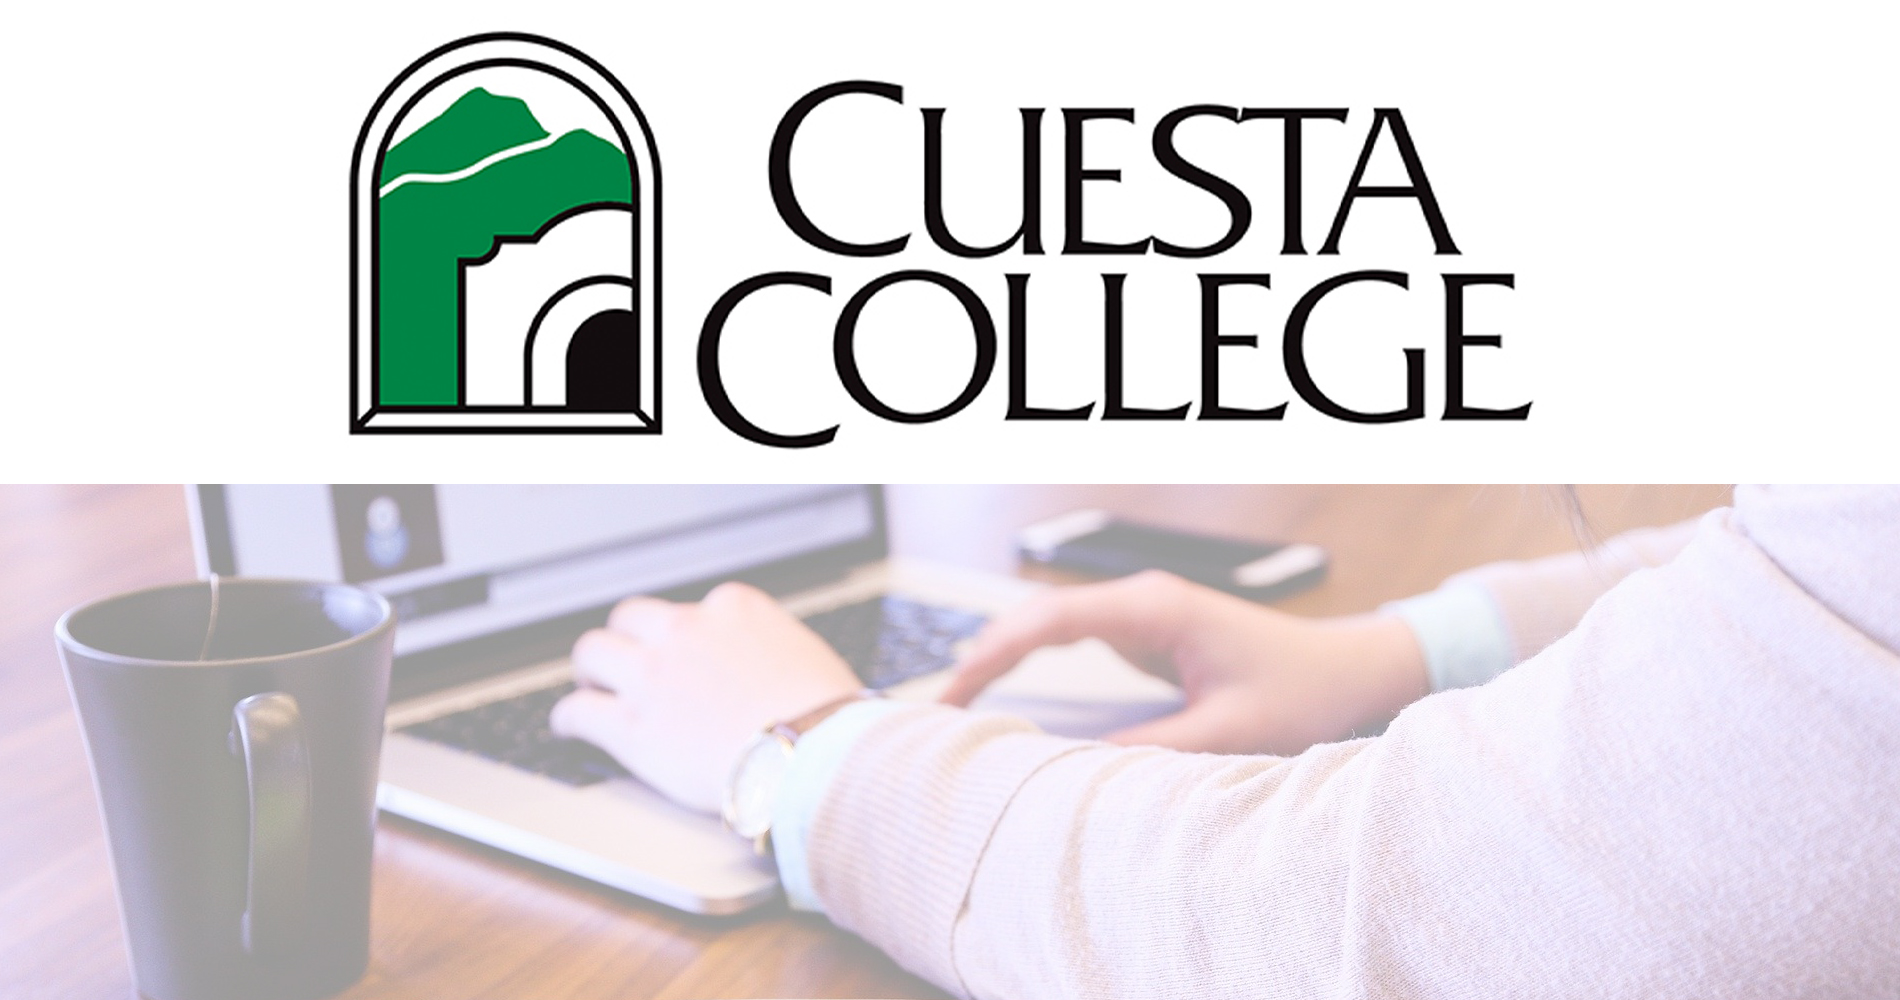 Cuesta College to Host Registration Rallies for Spring 2021 Semester